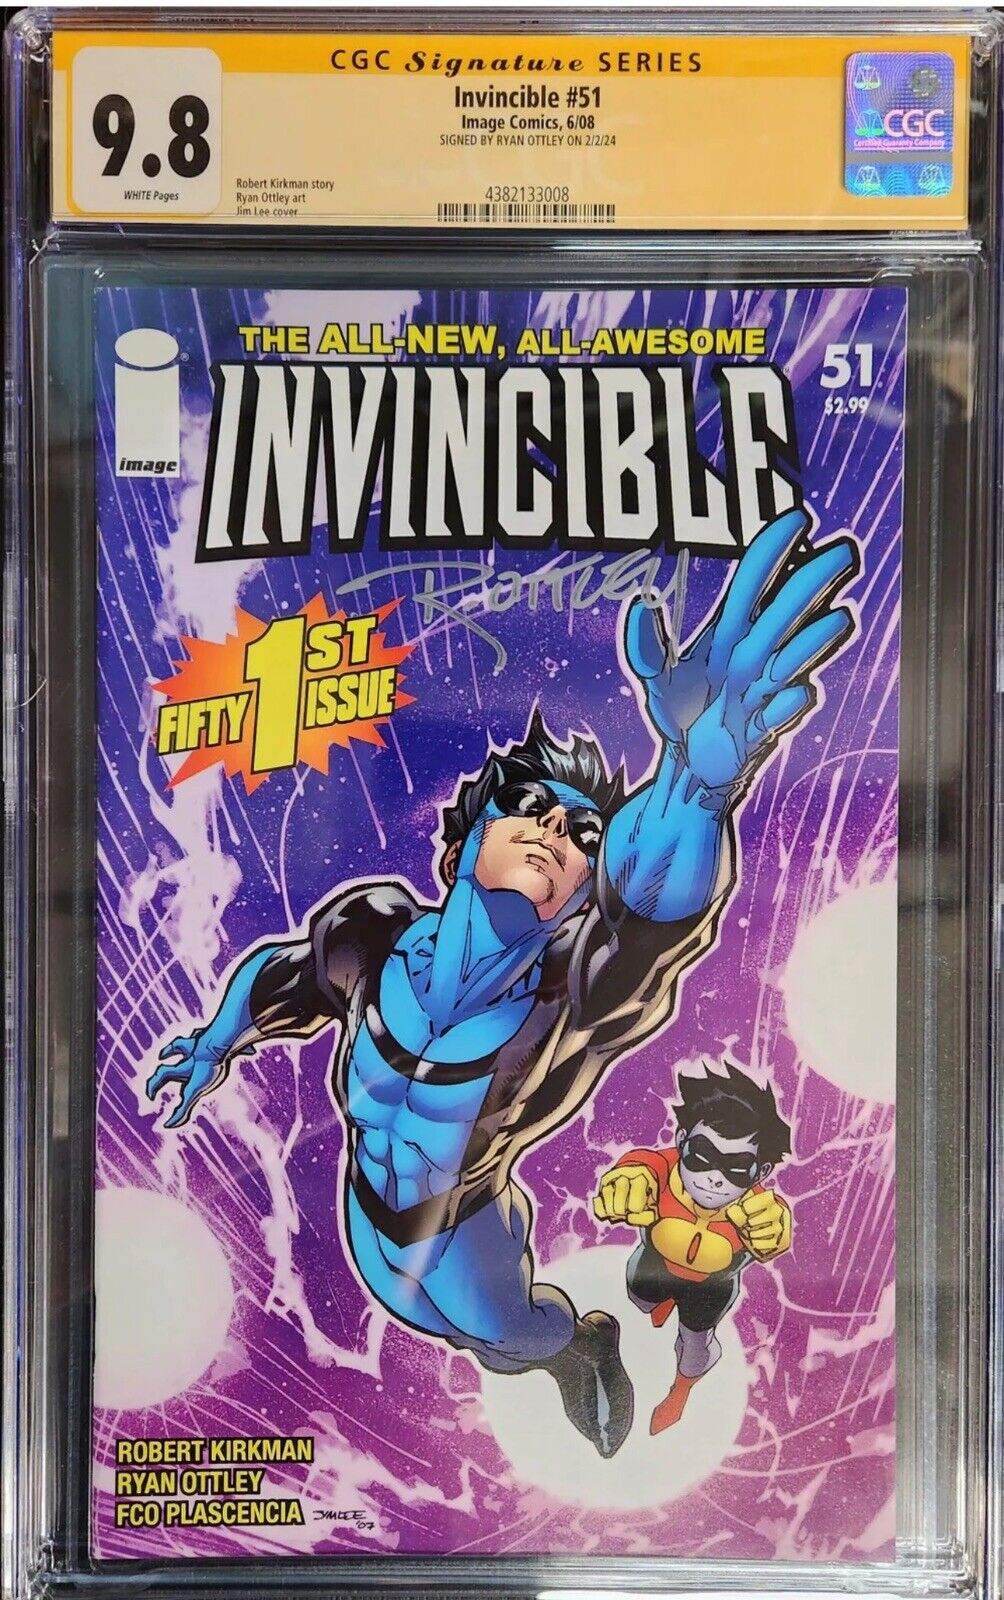 Ryan Ottley Signed Invincible #51  (2008) - CGC 9.8 only 6 on the CGC Census